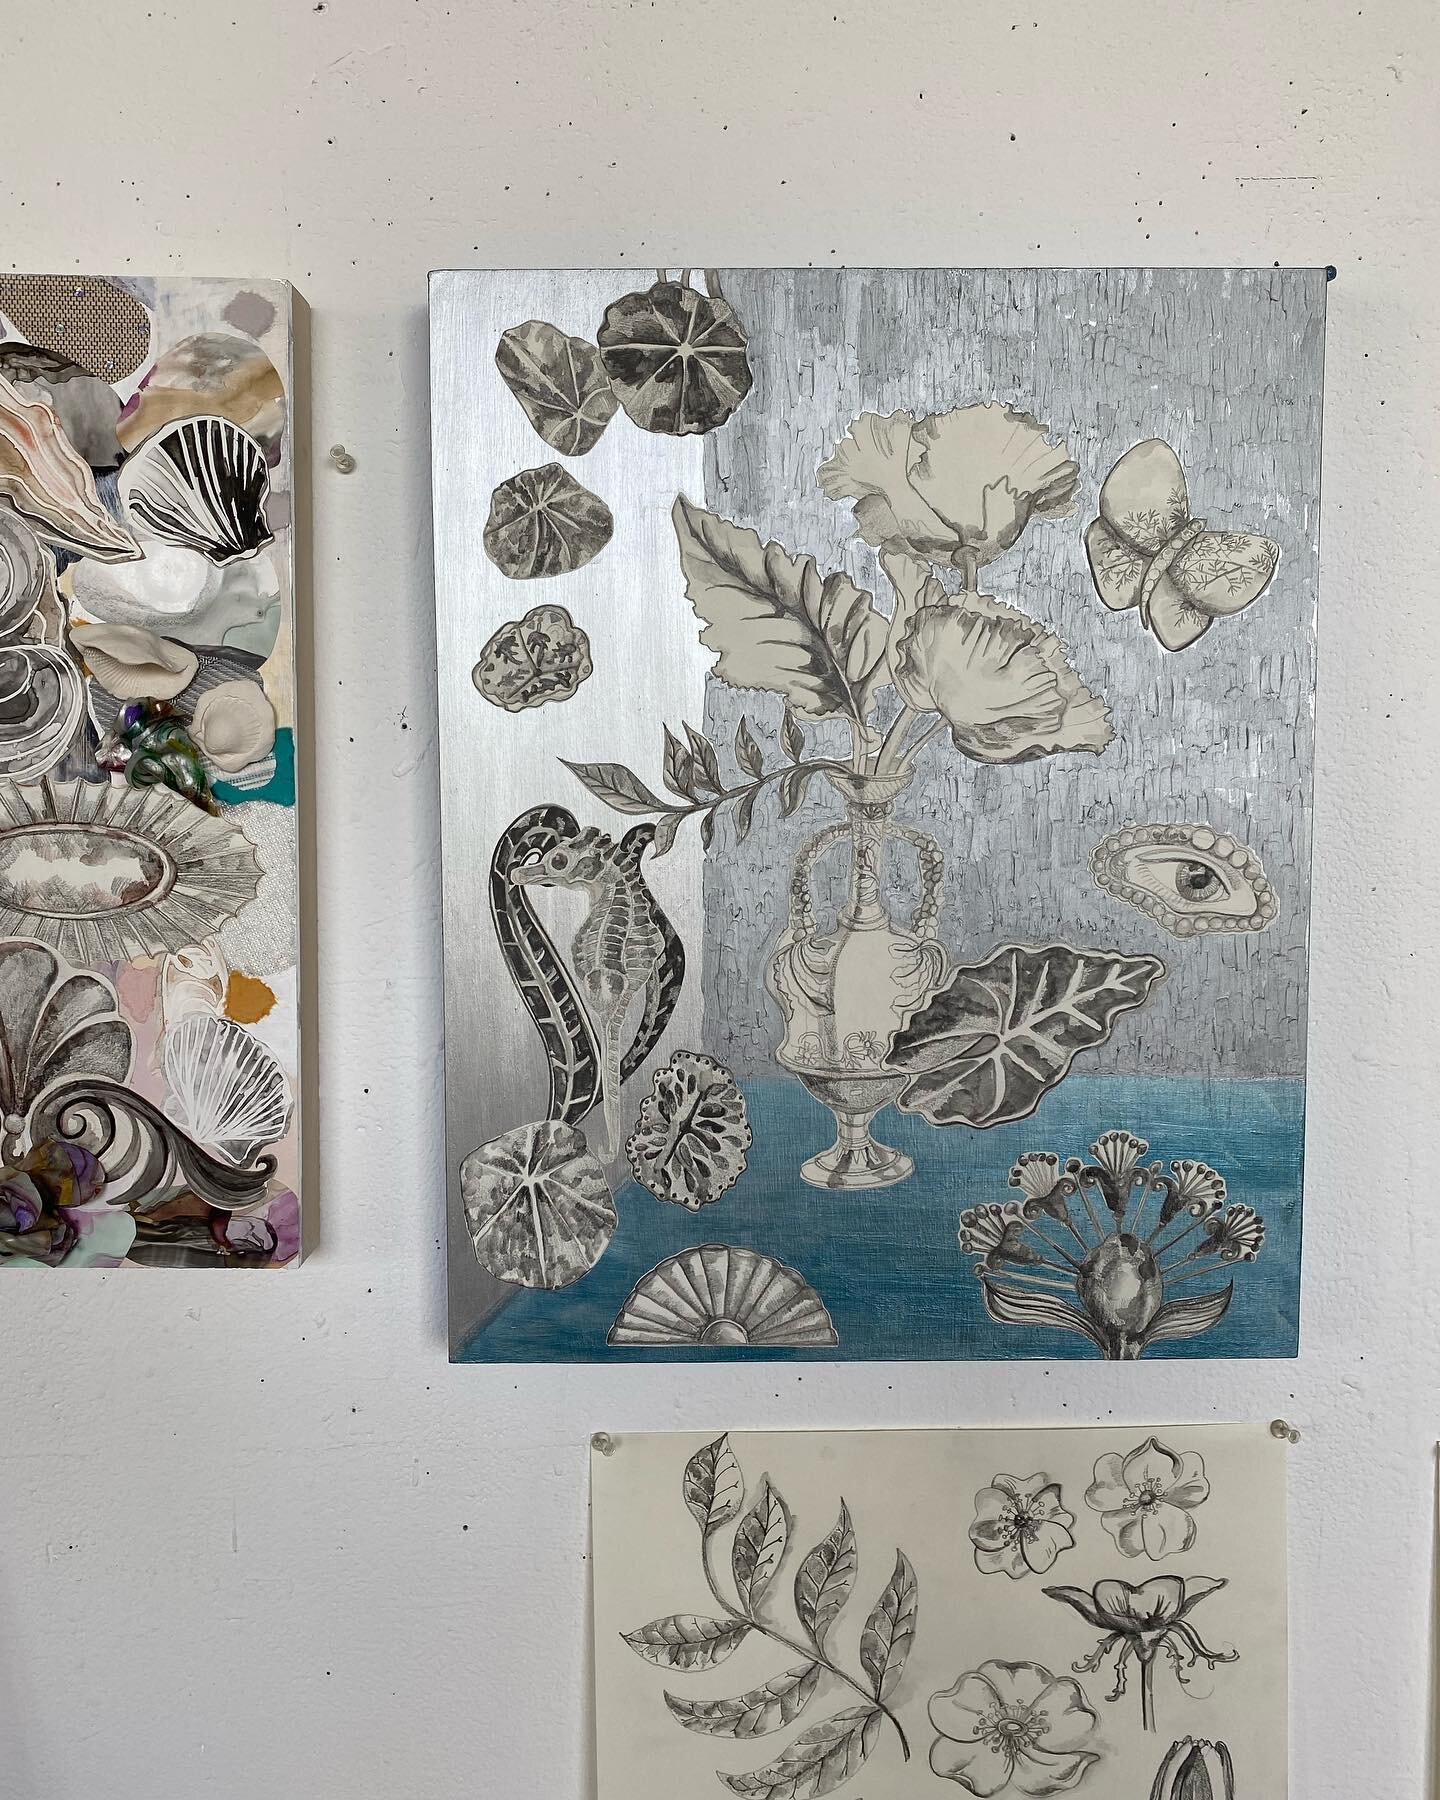 Mixed media, paper cutout drawings, silver leaf and acrylic on panel
.
.
.
#collage #collageart #vintagestyle #silver #papercutout #pghcreative #pittsburghartist #drawing #artdecostyle #mixedmediacollage #paperclay